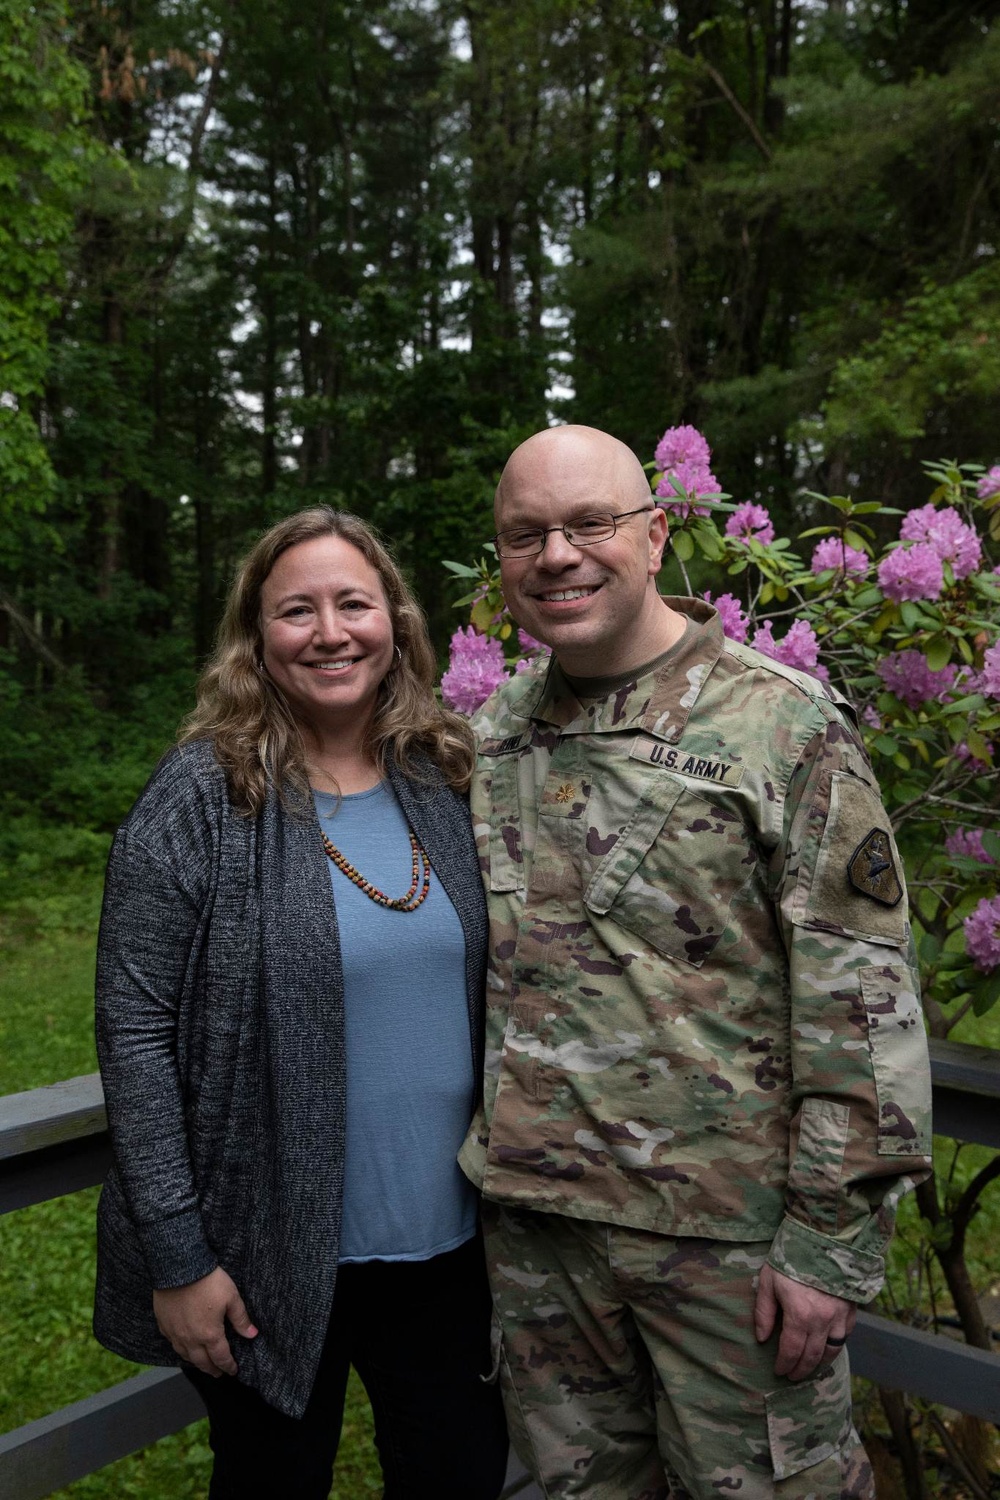 Balancing Duties: Army Reserve Life with Maj. and Mrs. Reiner